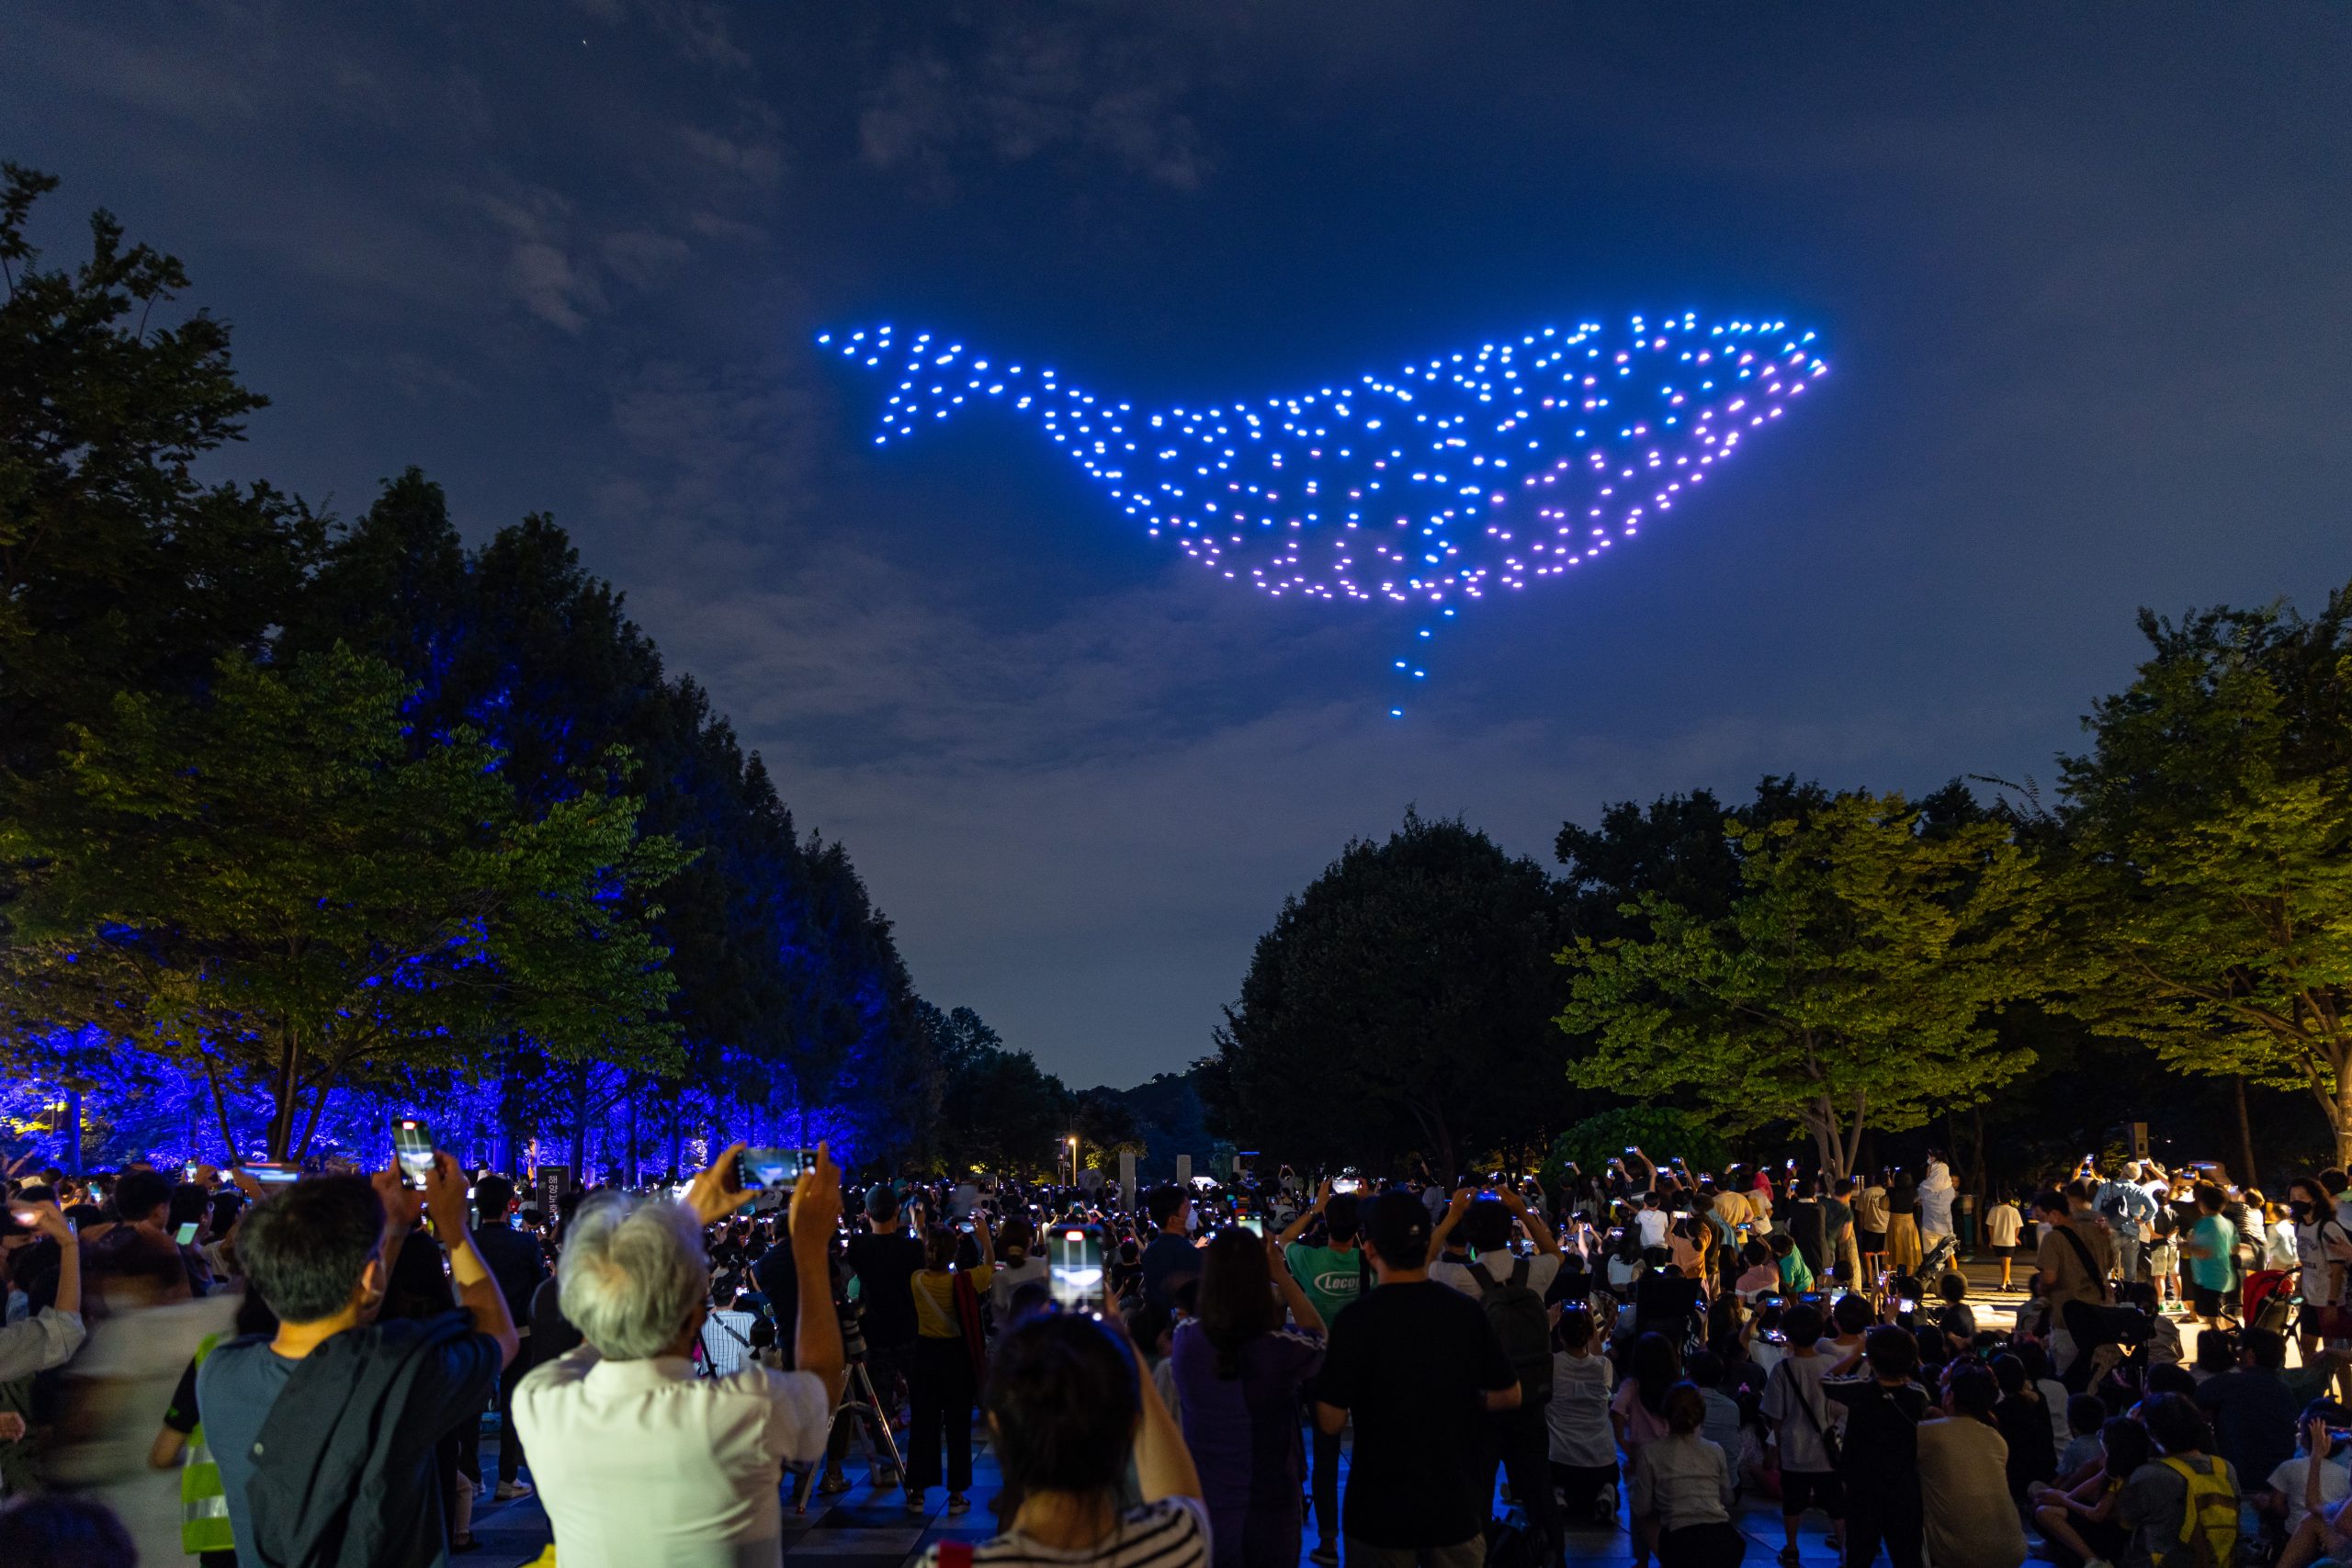 Greenpeace Seoul held an Ocean Drone show on 18th, August at Seoul Forest Park in Korea to engage people and push the global leaders for a strong Global Ocean Treaty at UN BBMK IGC5 in New York from 15th to 26th, August